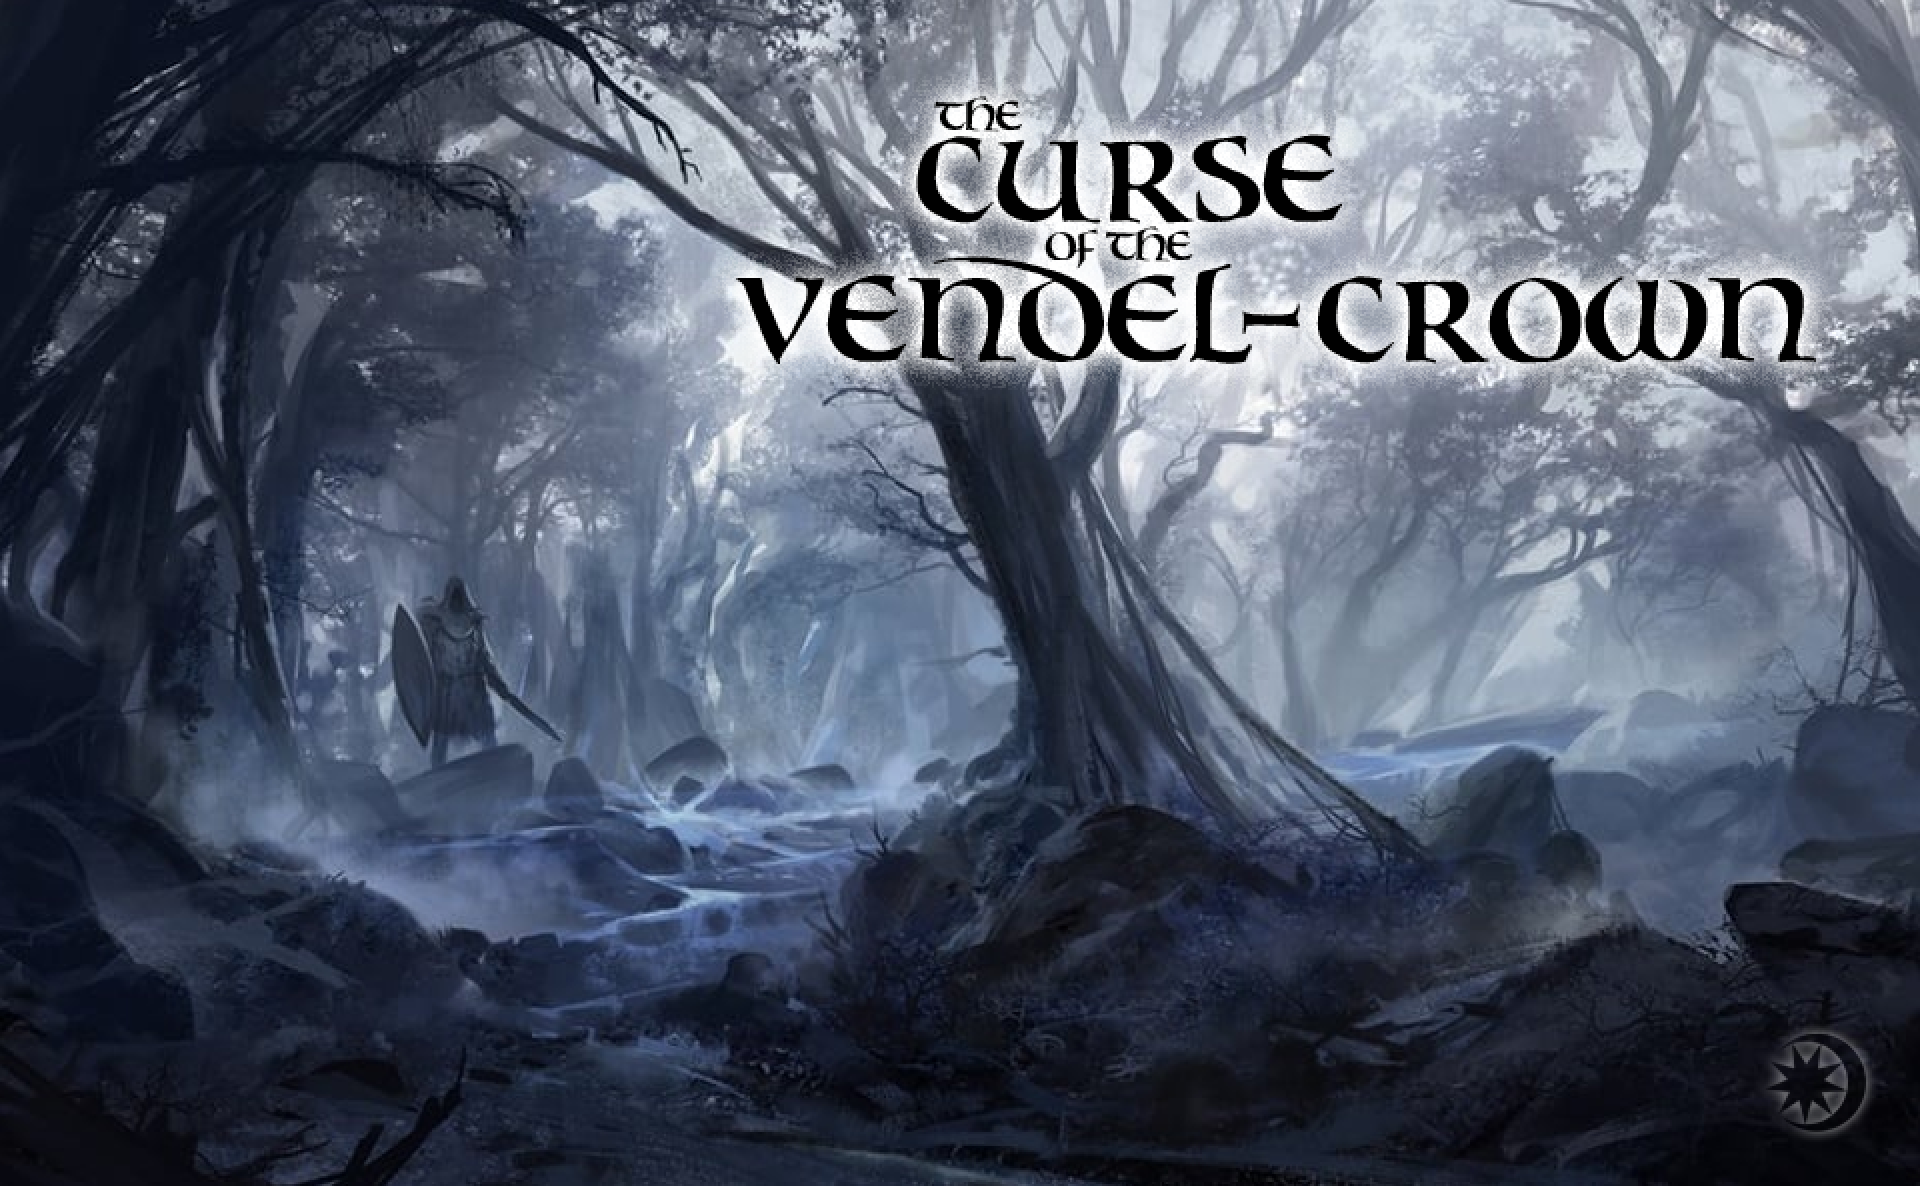 The Curse of the Vendel-Crown